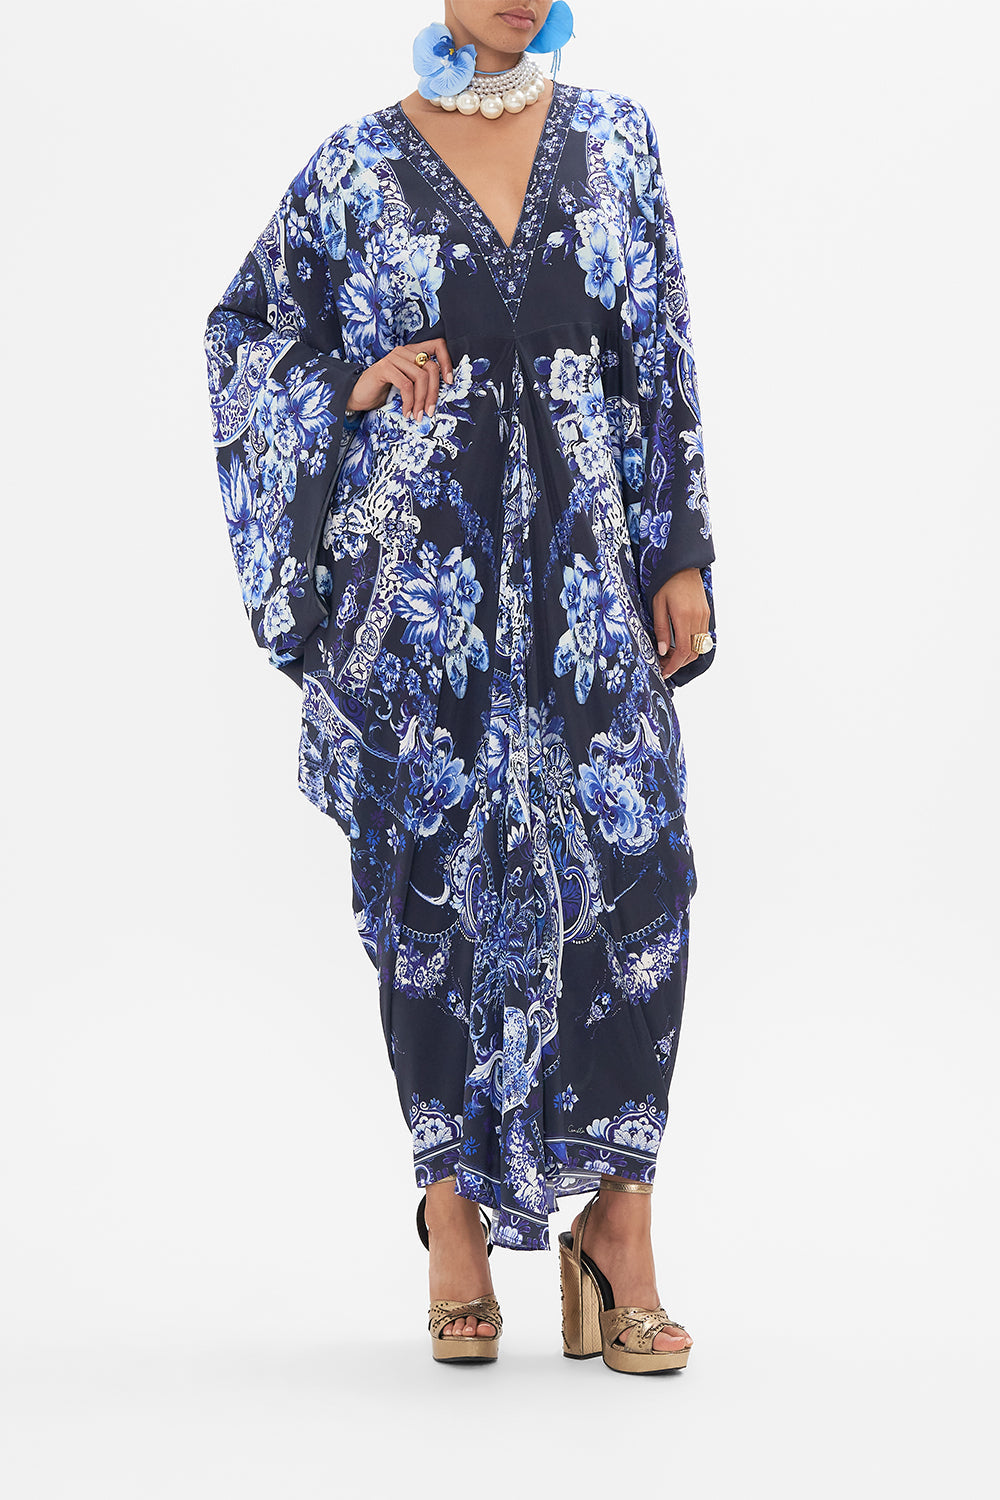 Front view of model wearing CAMILLA silk kaftan in Delft Dynasty print